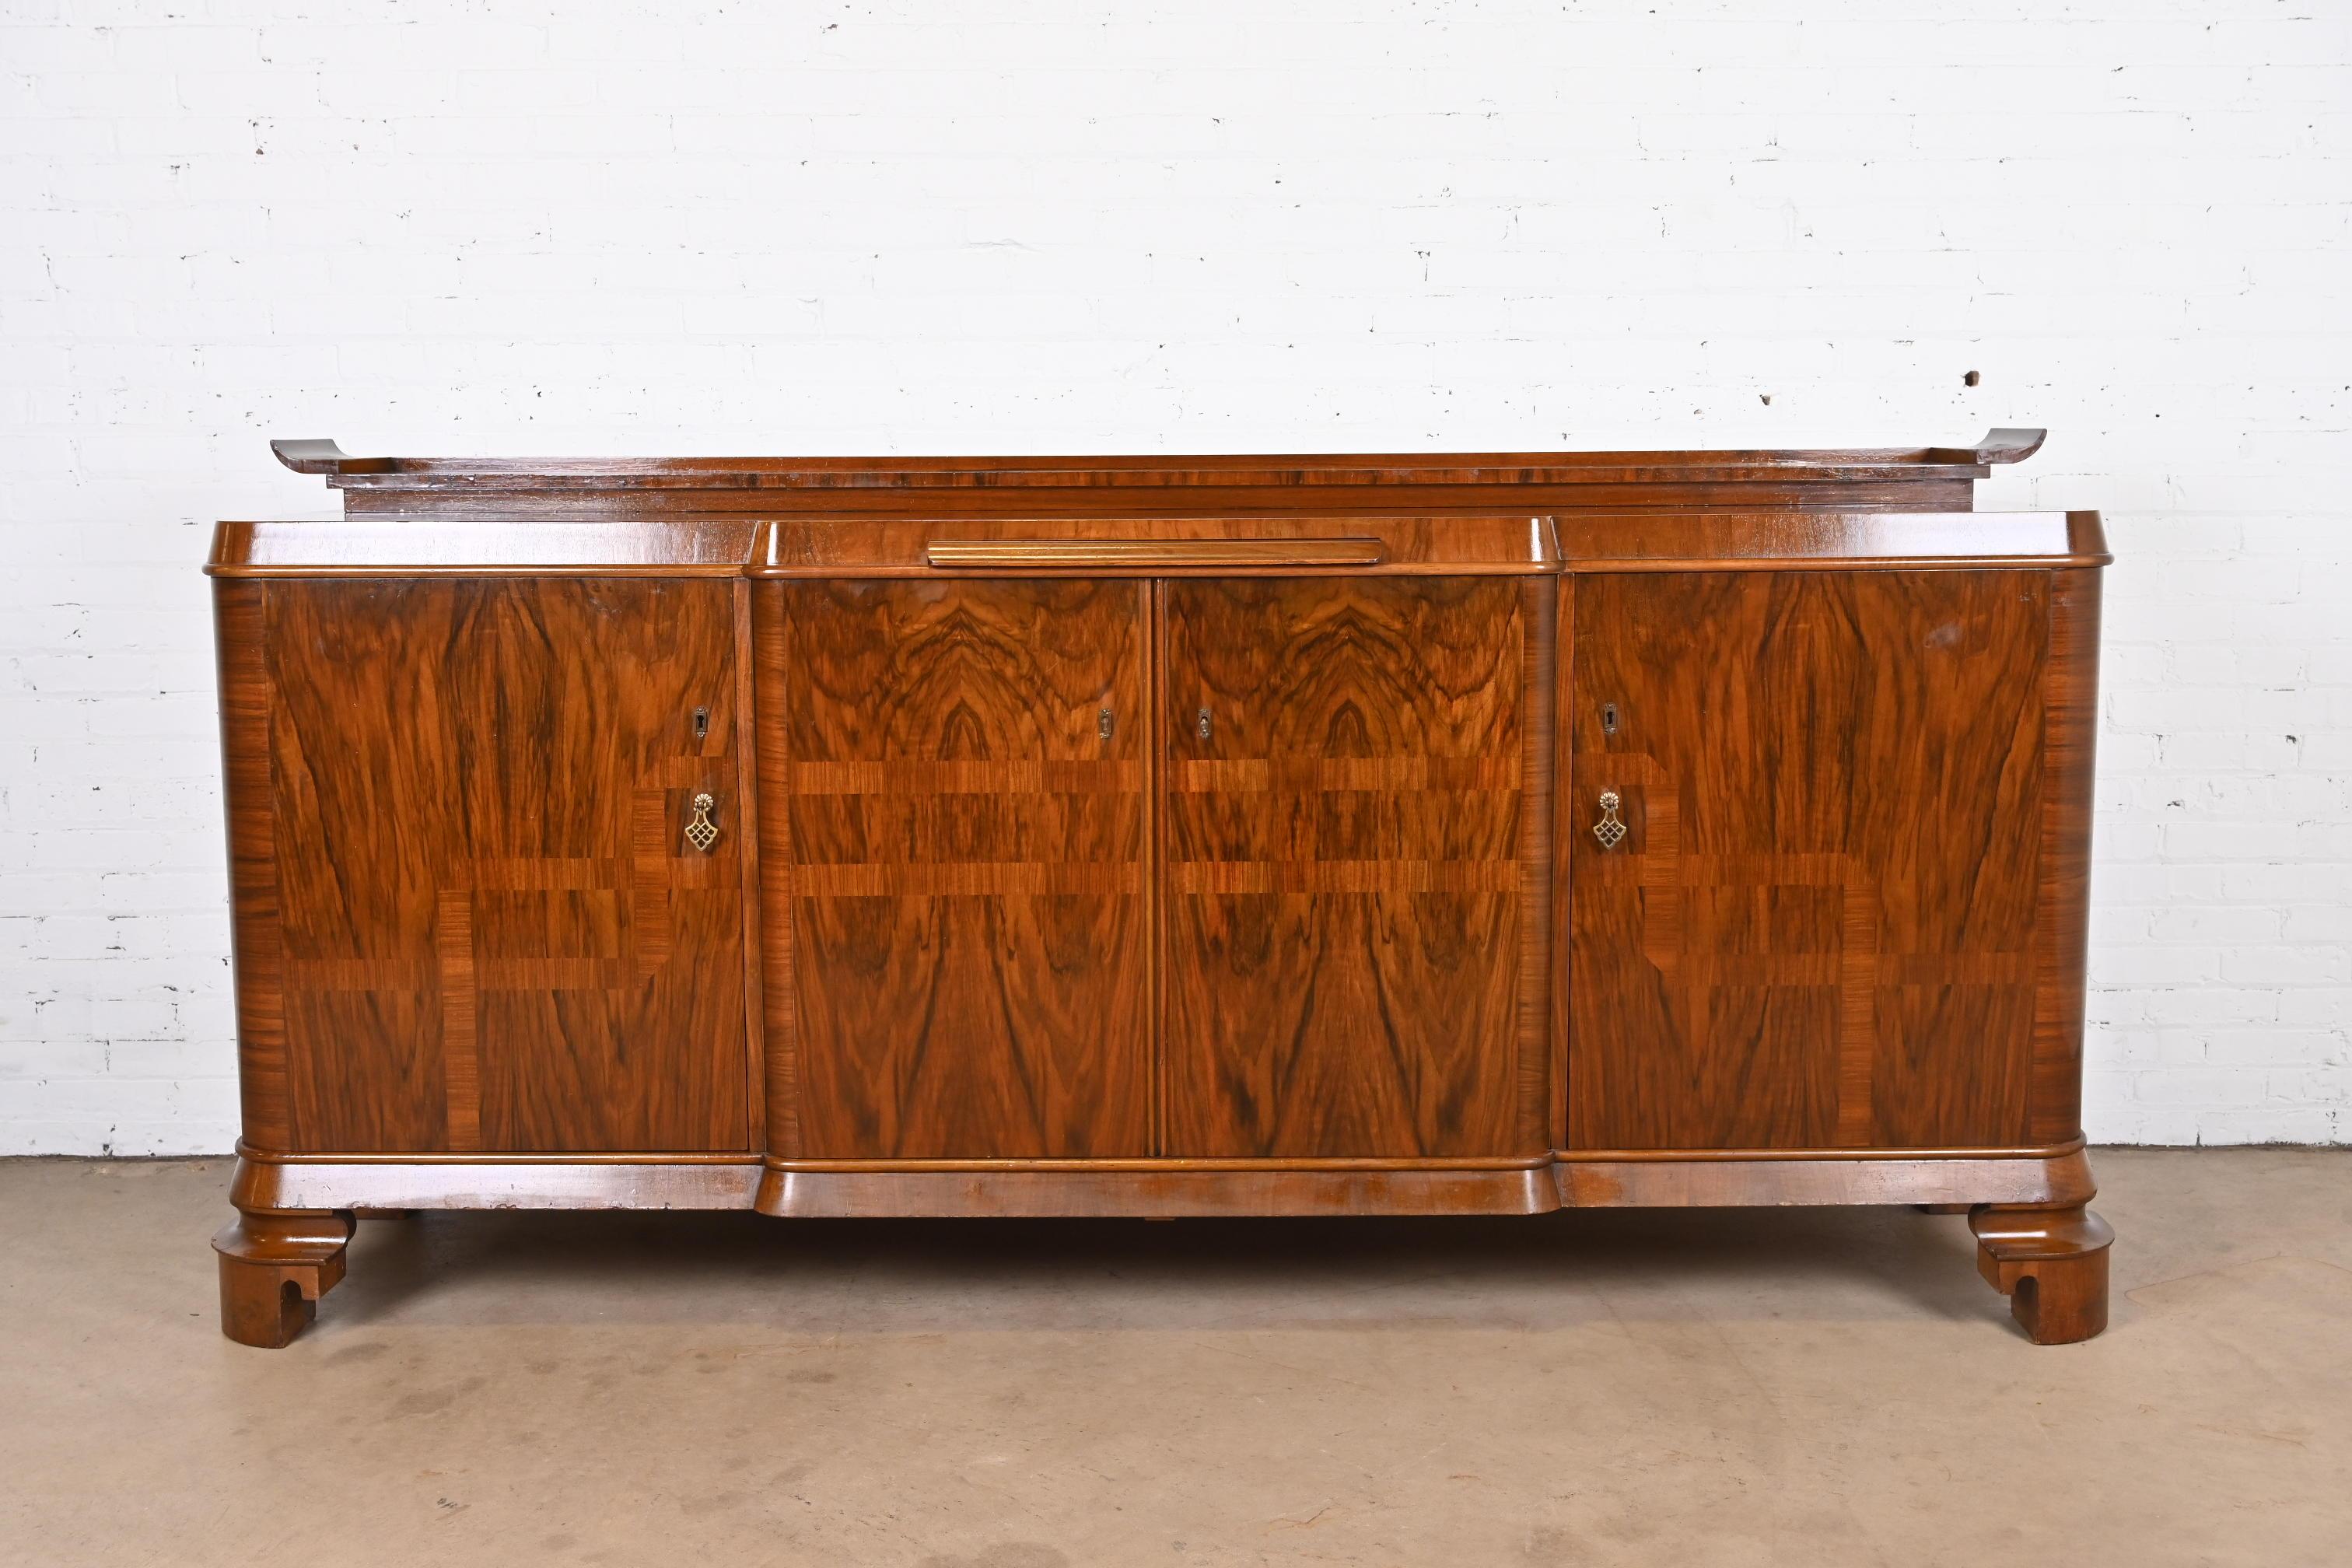 An exceptional monumental French Art Deco sideboard, credenza, or bar cabinet

In the manner of Jules Leleu

France, Circa 1930s

Stunning book-matched burled walnut with inlaid design, inset marble pull-out tray, and brass hardware. Key